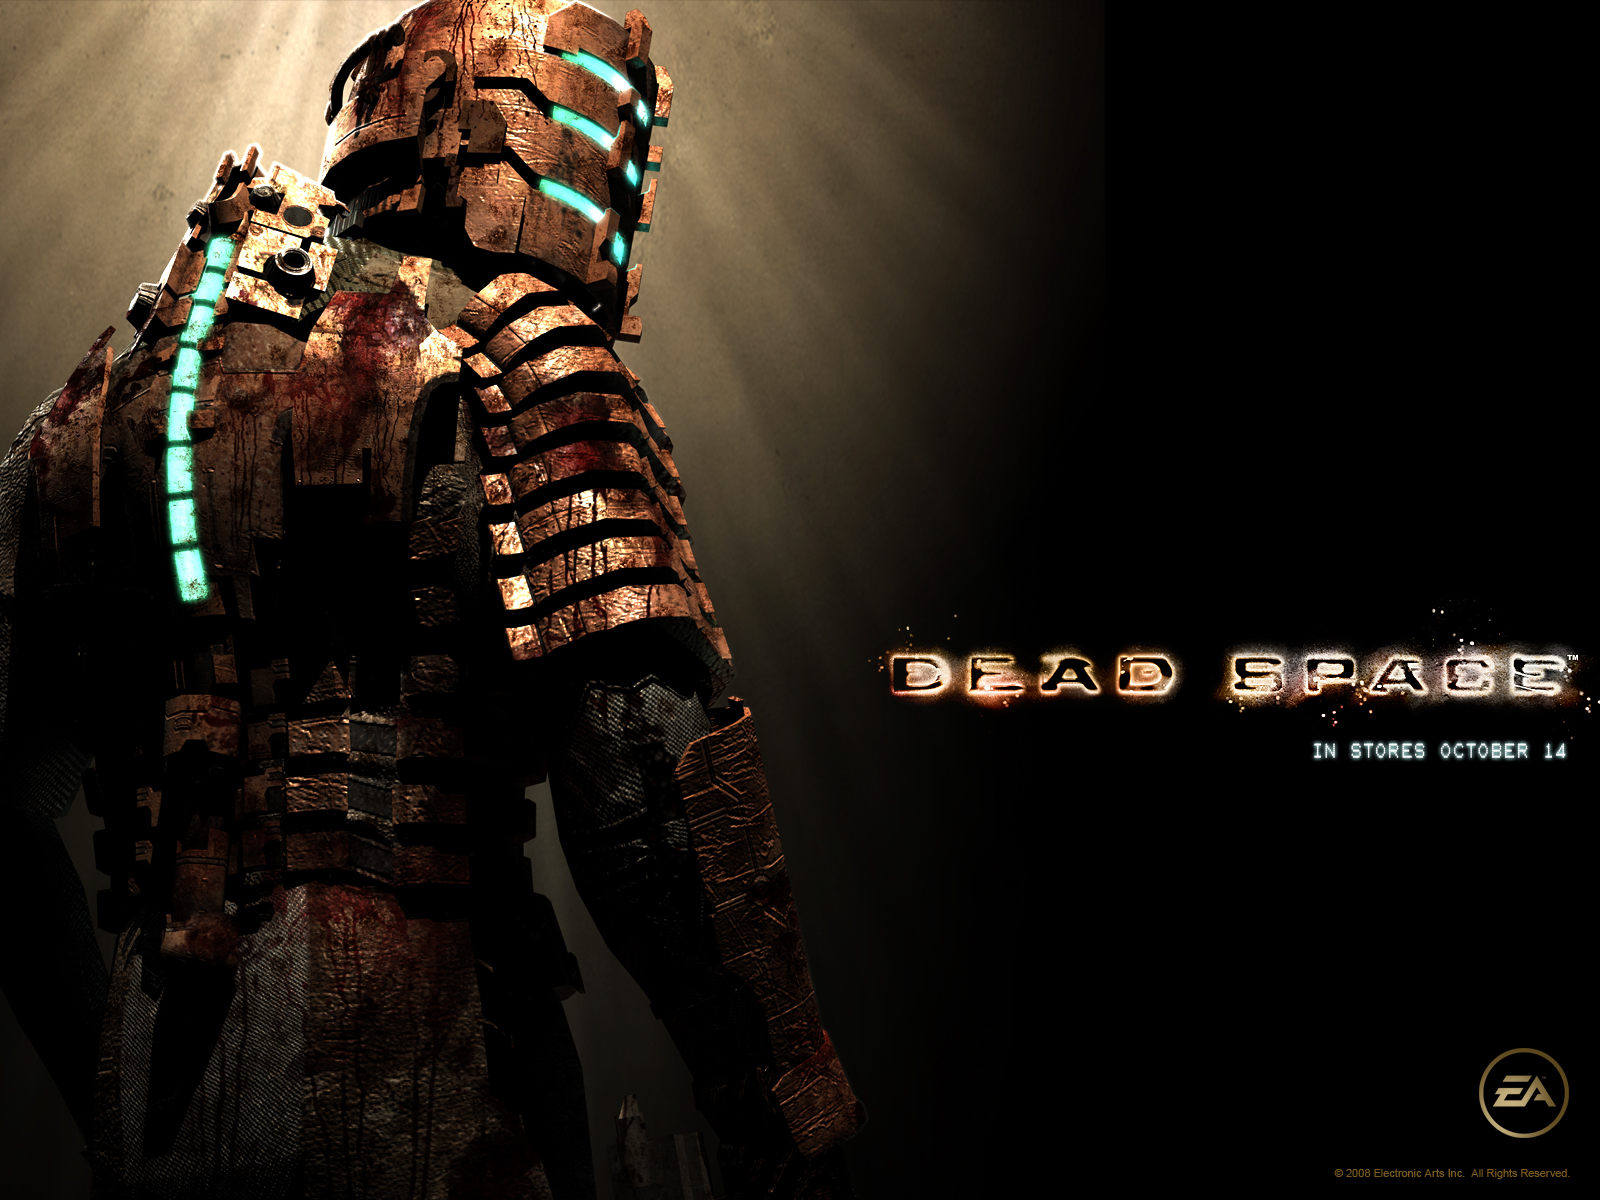 Dead Space #13